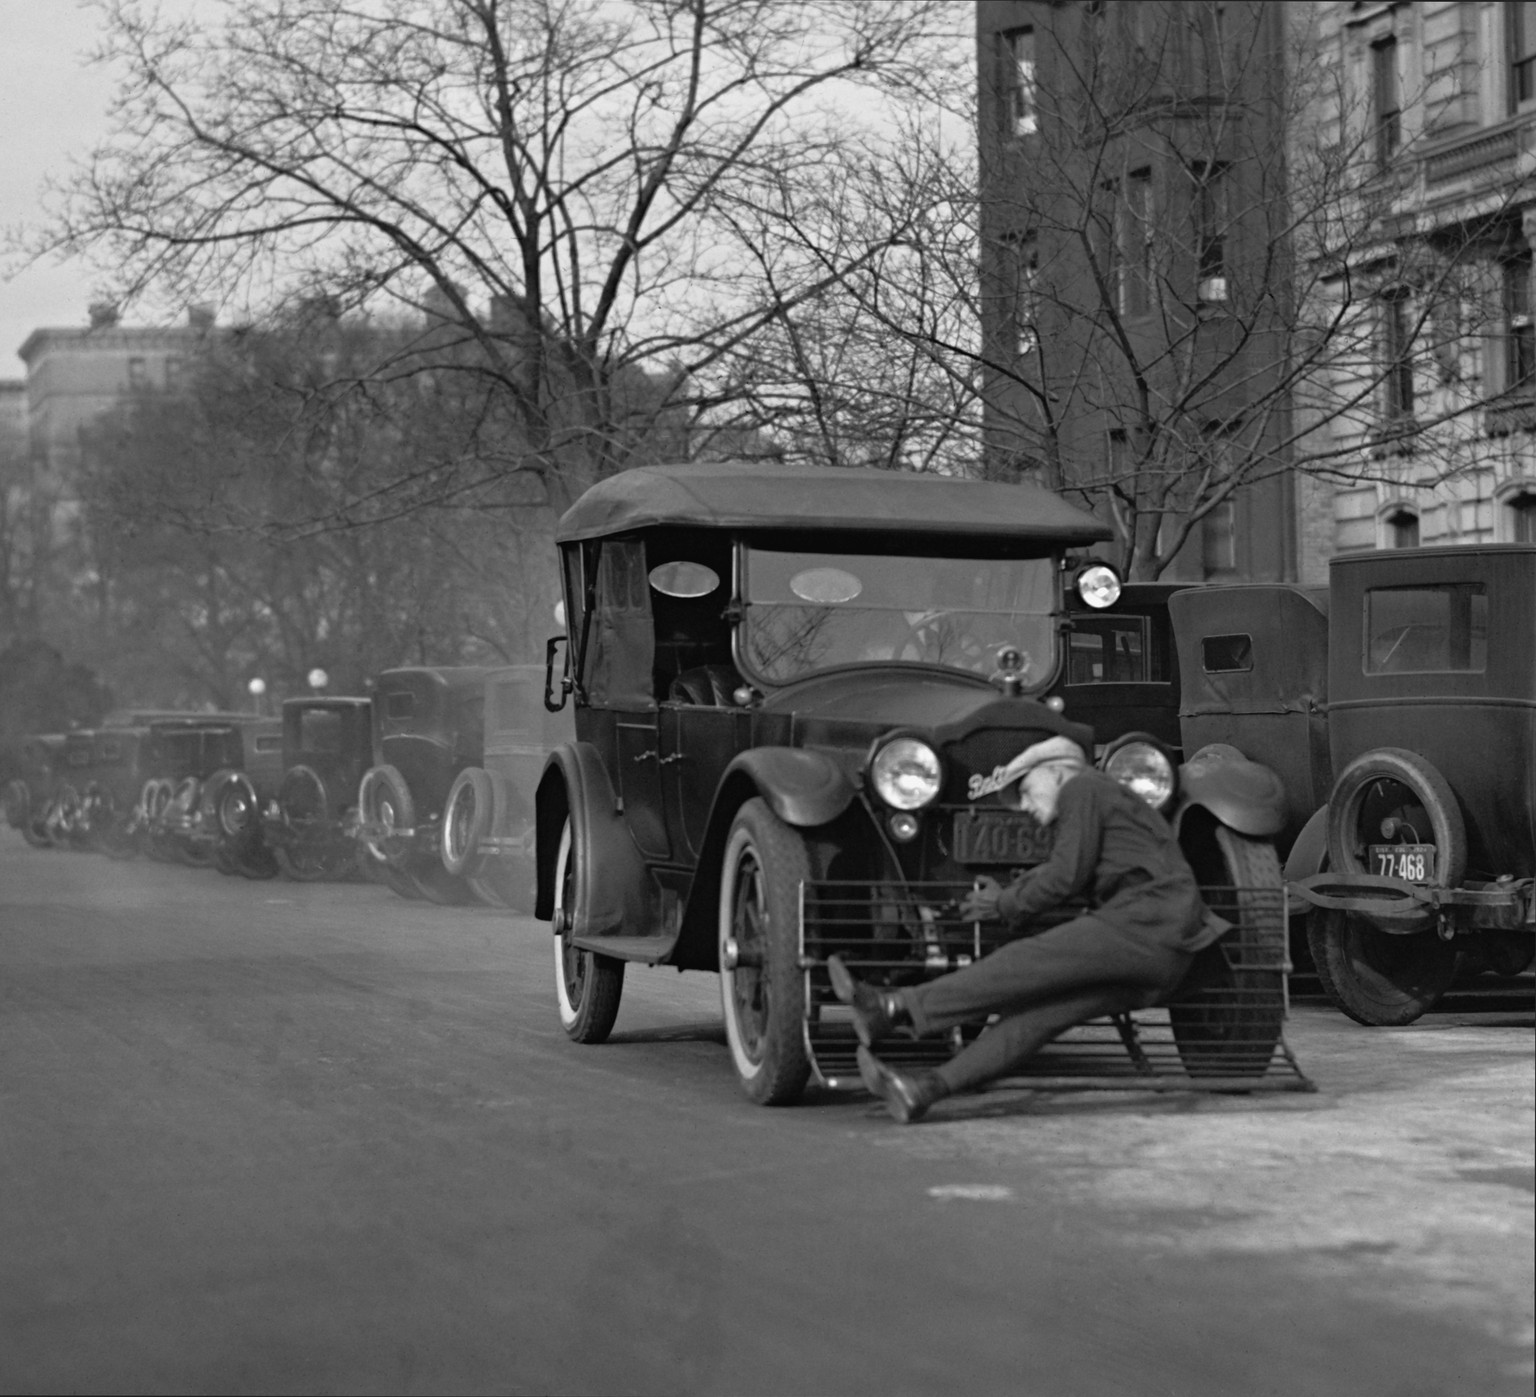 Test of an automobile equipped with a 'cow catcher' for the safely of pedestrians. Washington, D.C., Dec. 17, 1924 - Bilder
auto motor history usa Test of an automobile equipped with a 'cow catcher' f ...